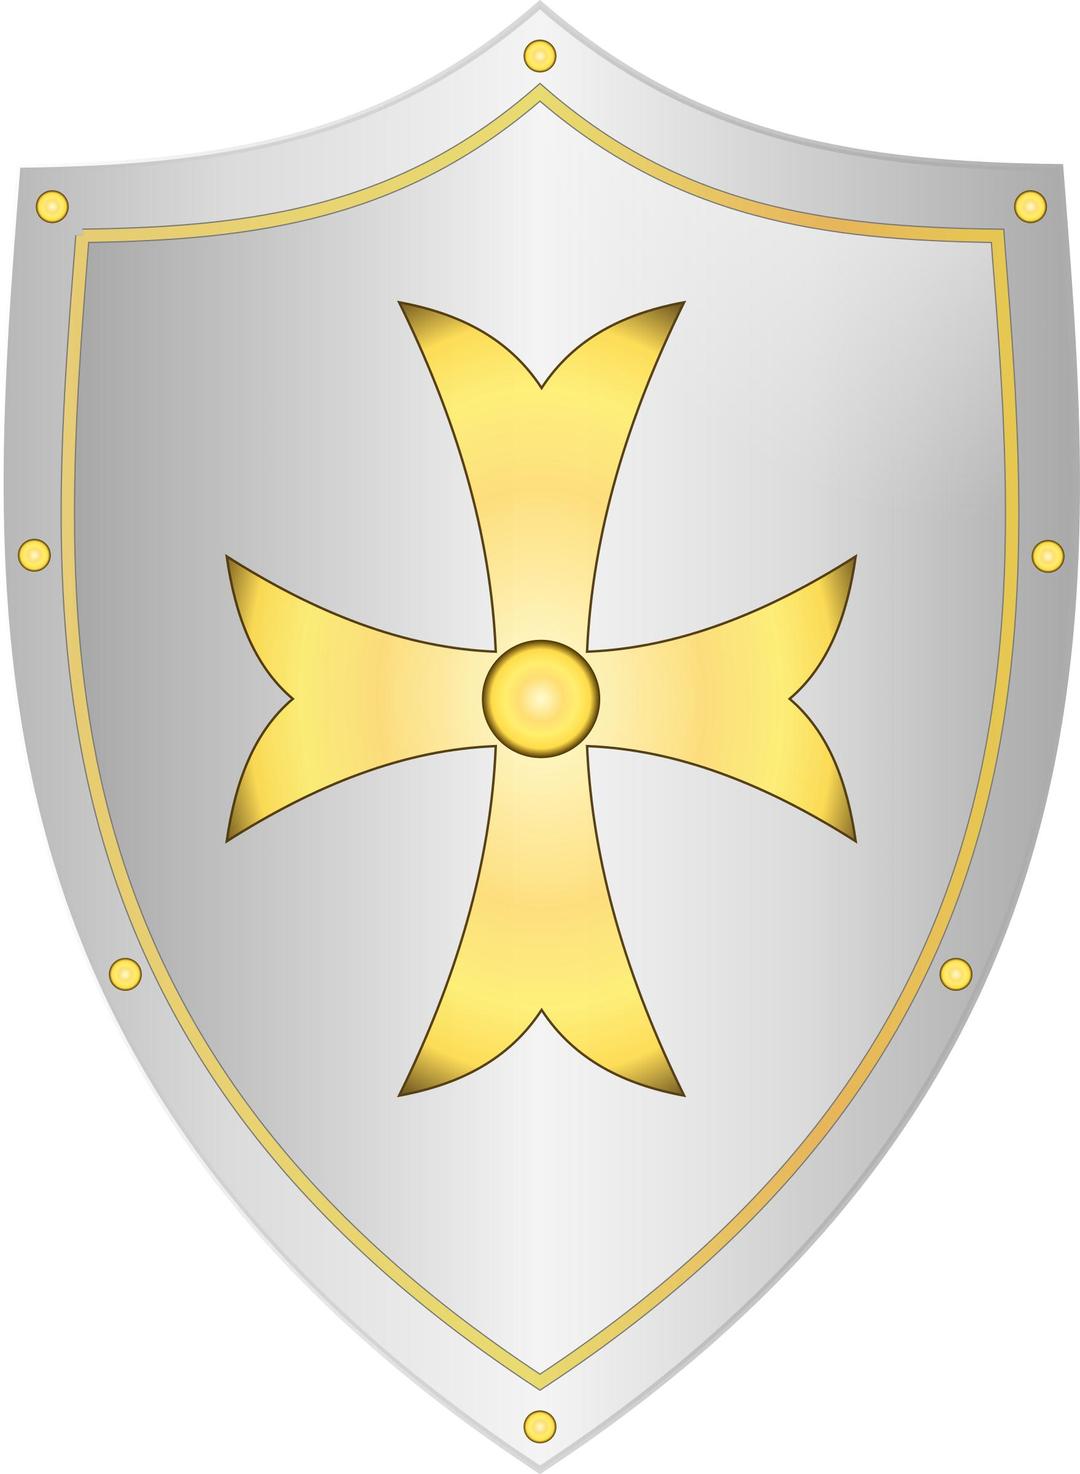 Classic Medieval Shield png transparent